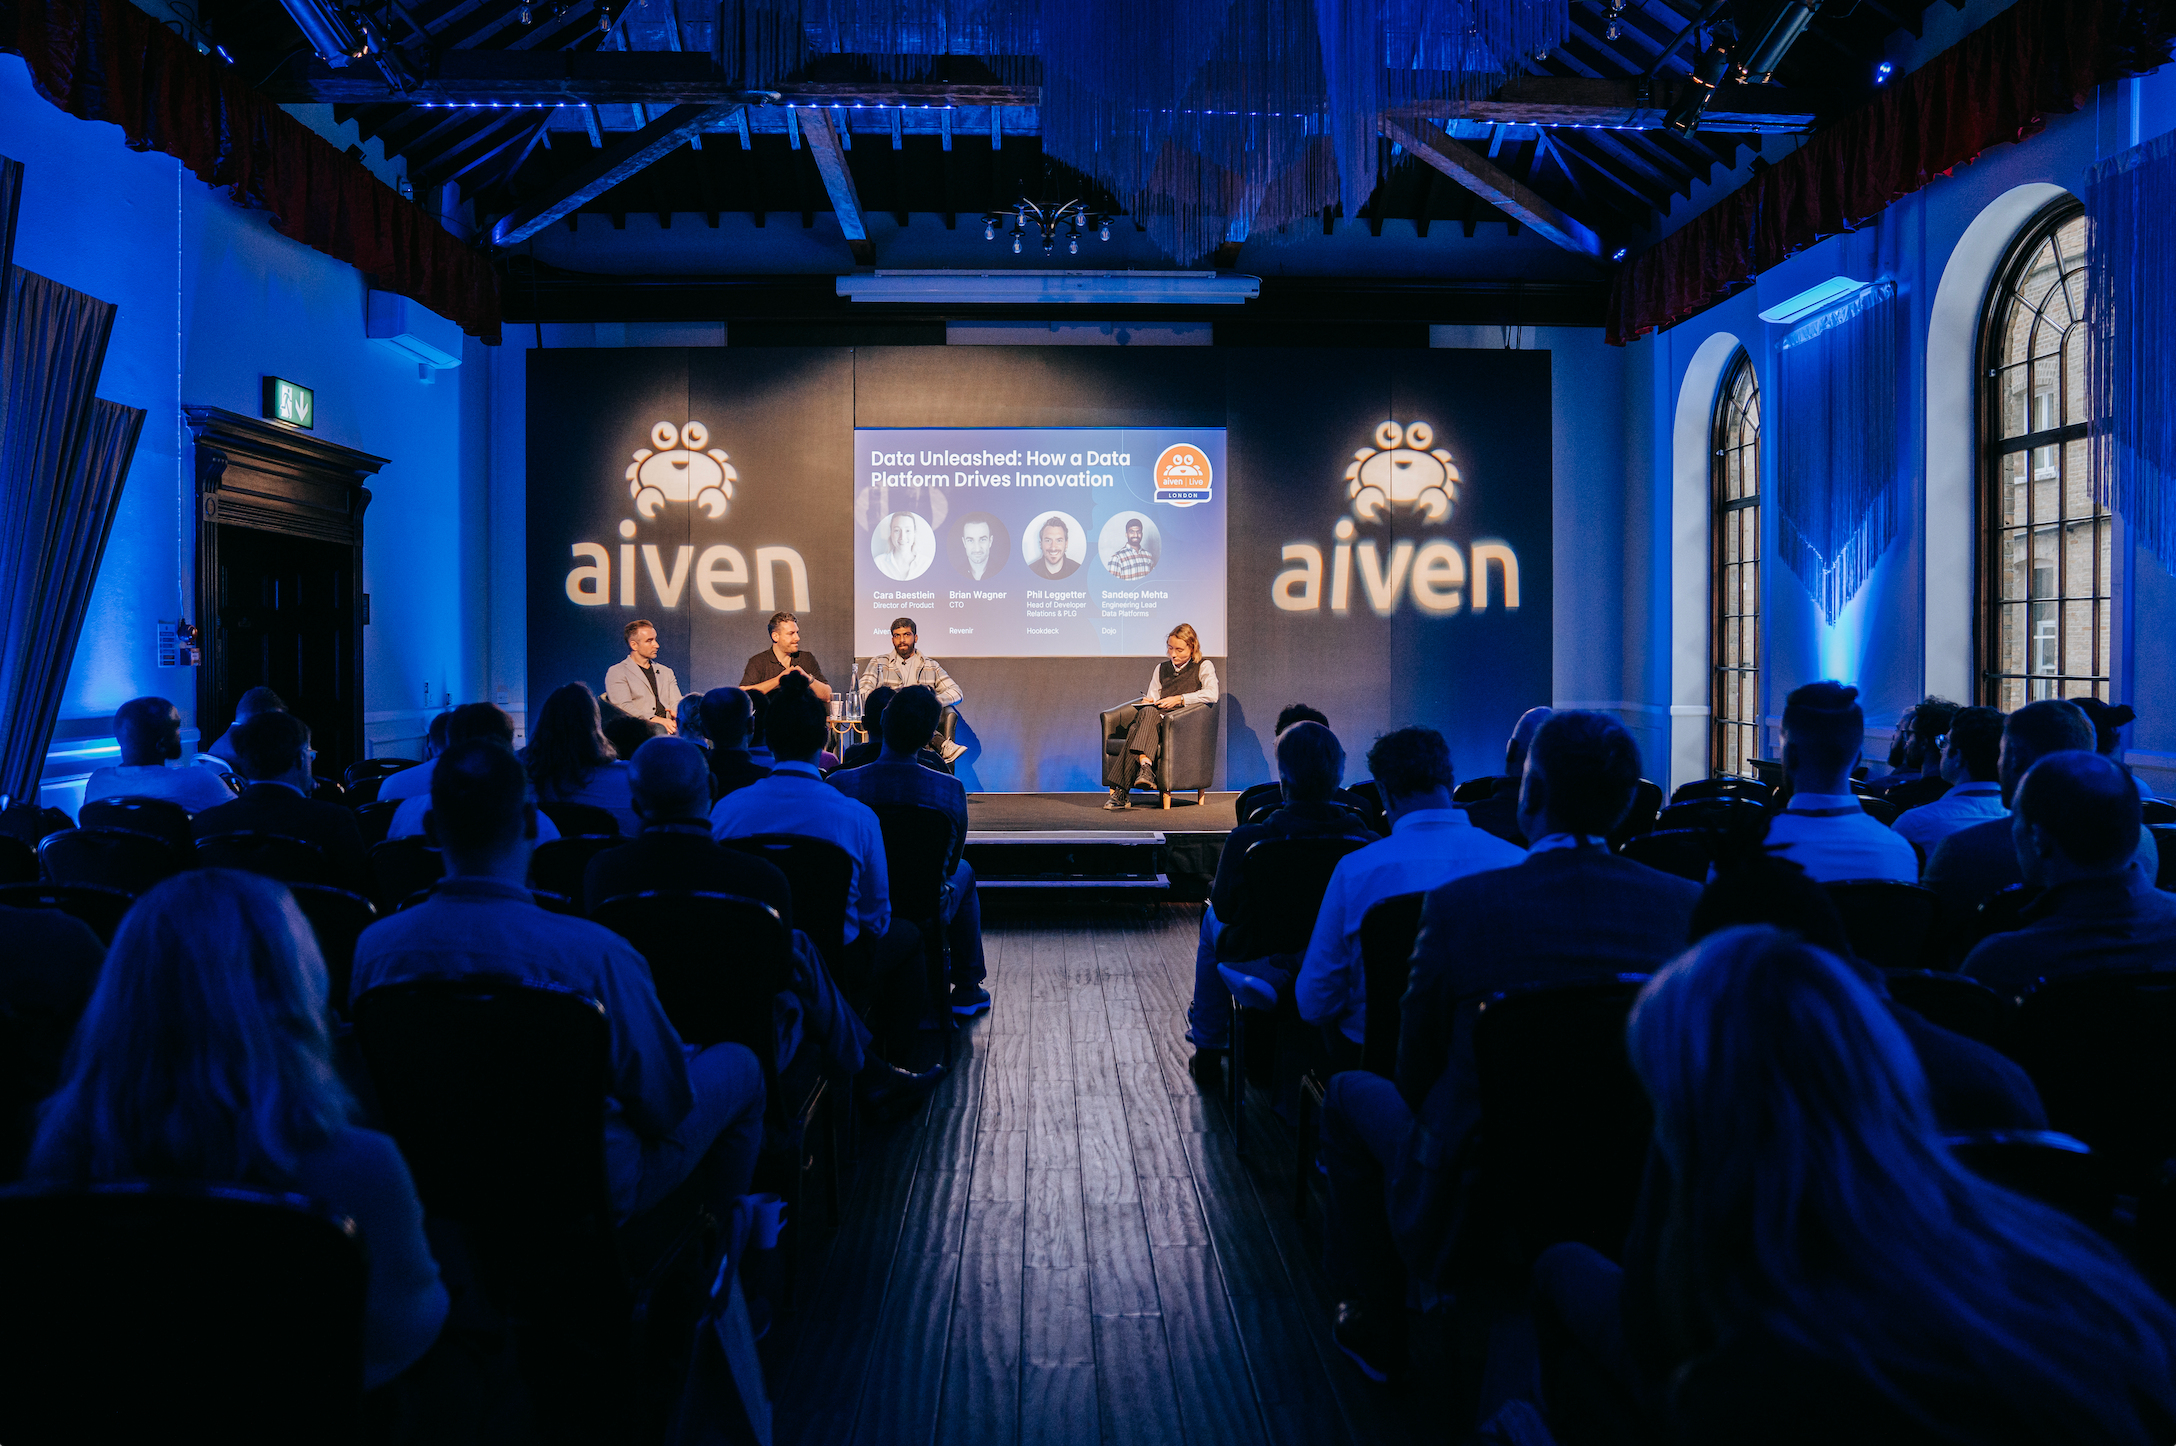 Aiven Live Customer Panel on stage